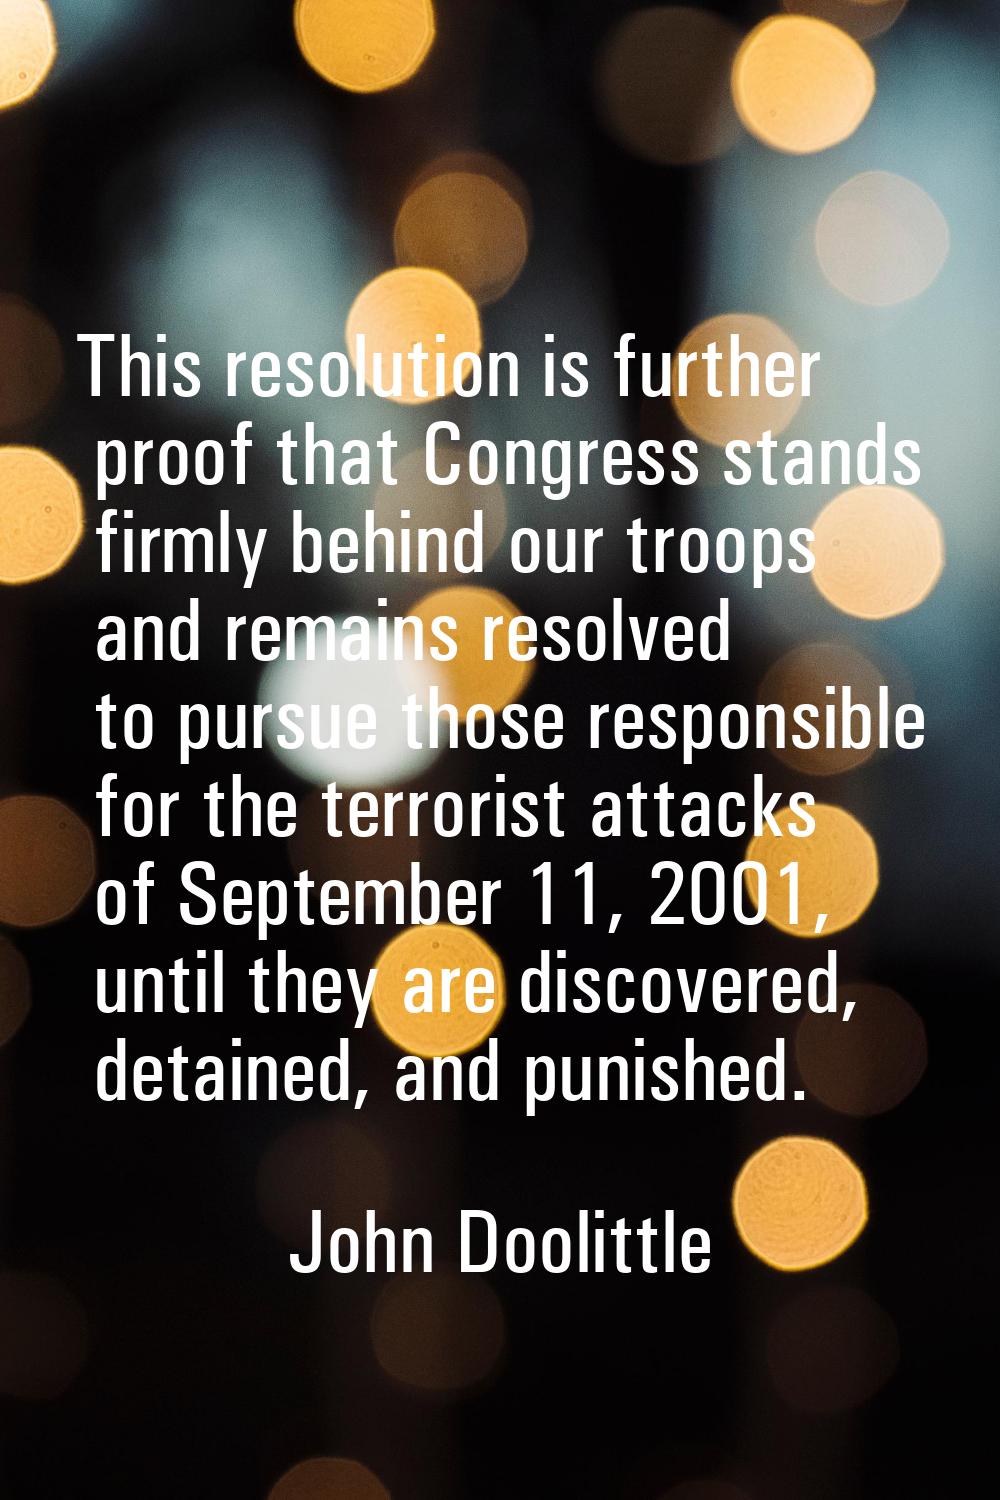 This resolution is further proof that Congress stands firmly behind our troops and remains resolved